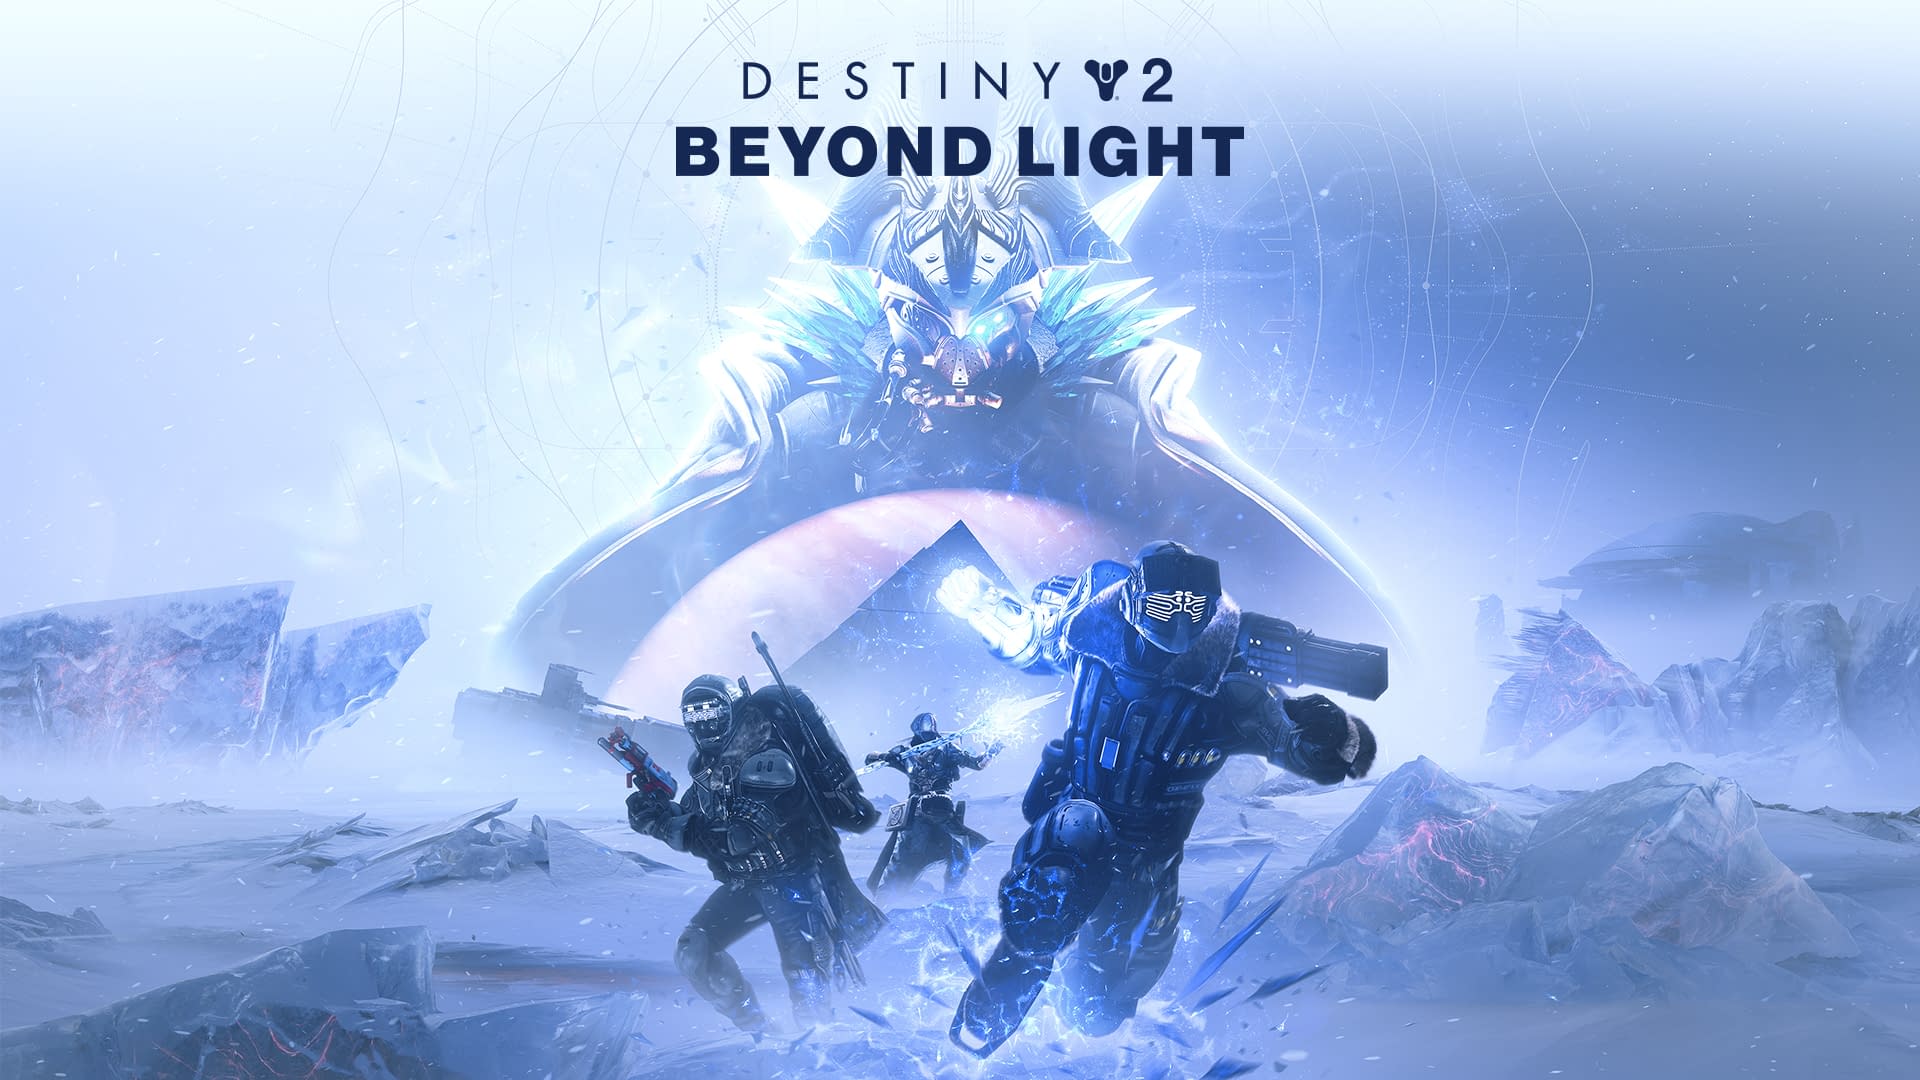 Bungie Releases A Behind The Scenes Video For Destiny 2: Beyond Light